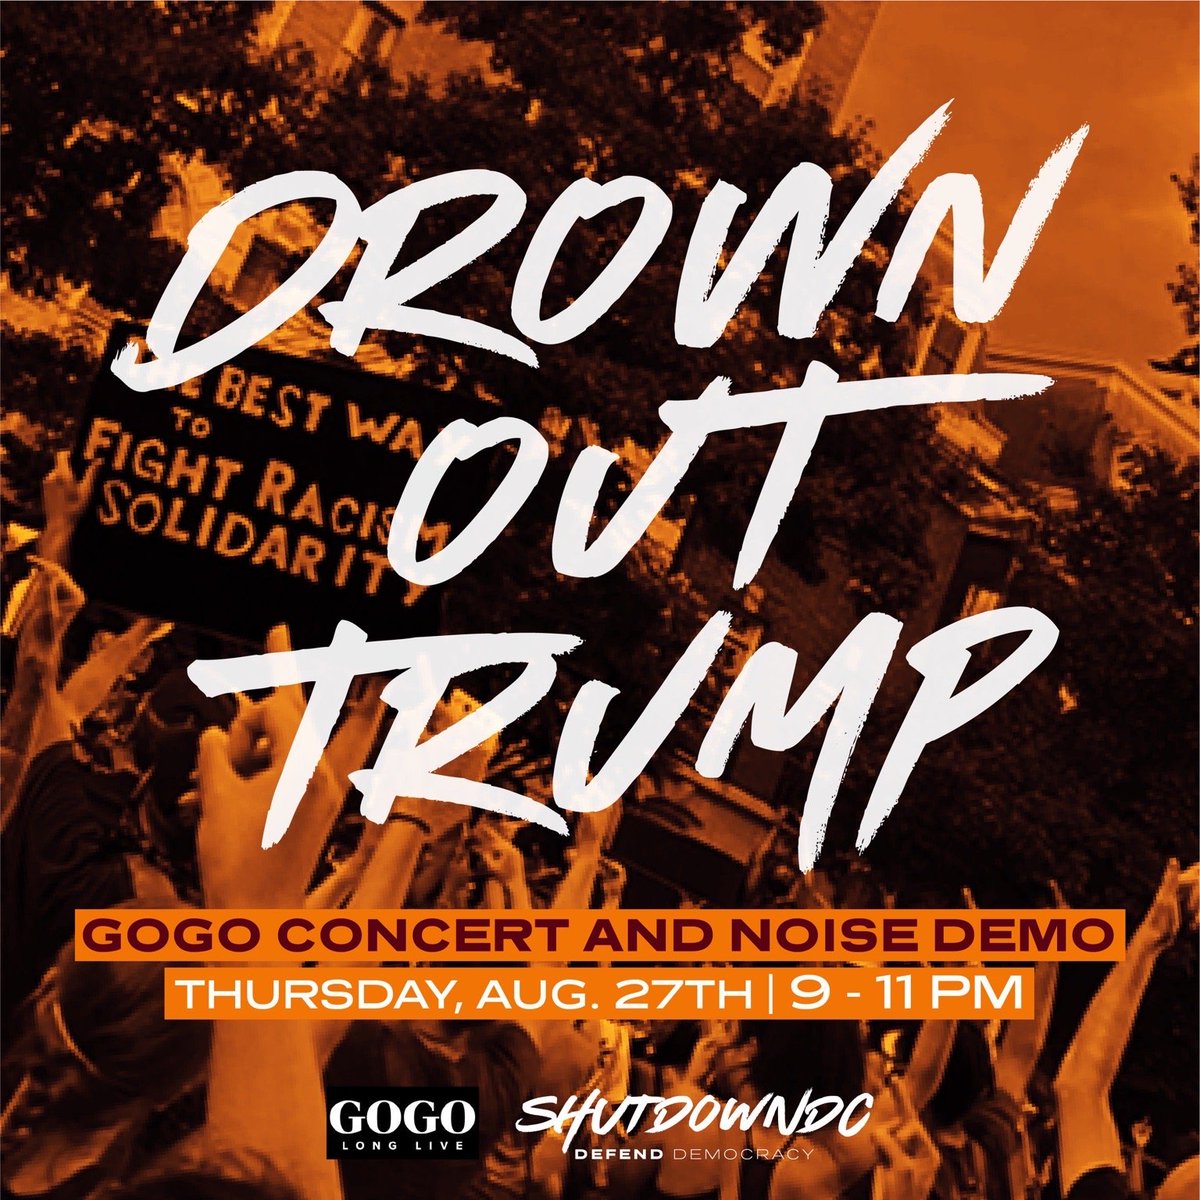 Drown Out Trump Live GoGo Show and Noise Demo with  @ShutDown_DC  @LongLiveGoGo and  @TOBBANDANDSHOW starting at 9pm at 17th and Pennsylvania.